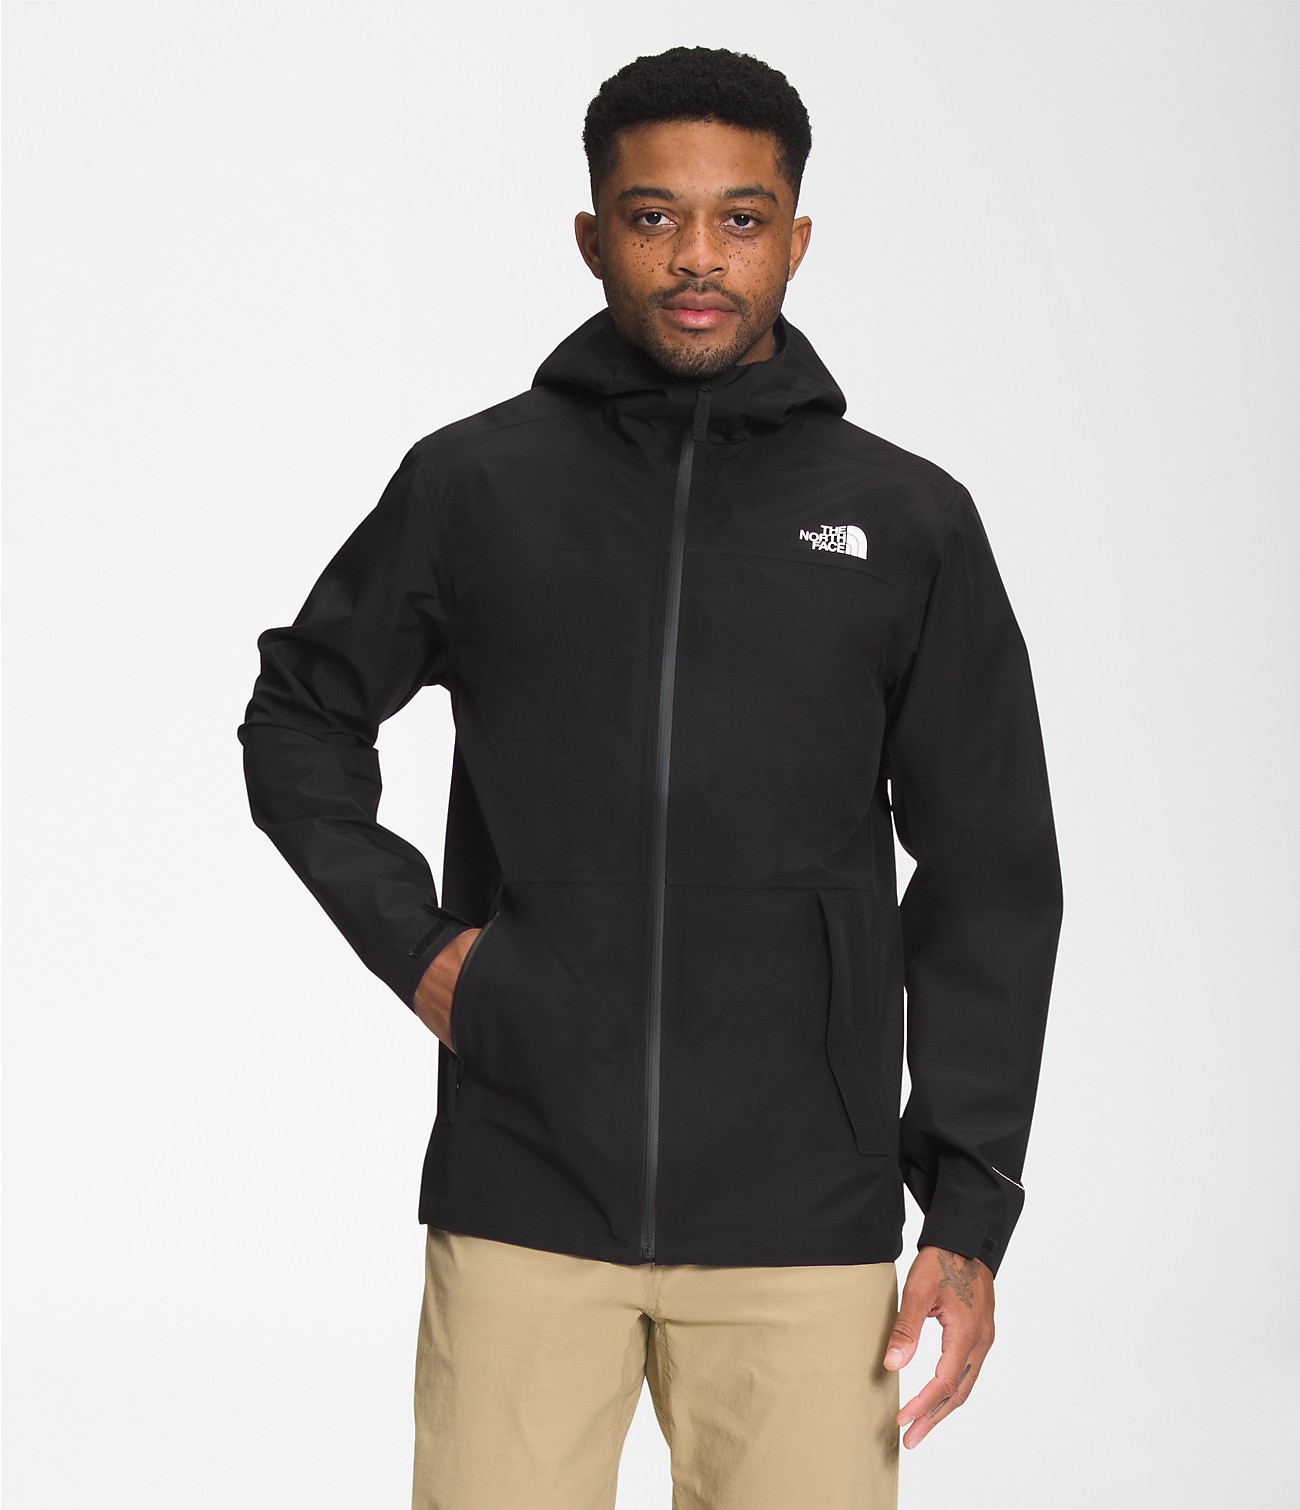 Unlock Wilderness' choice in the Carhartt Vs North Face comparison, the Dryzzle FUTURELIGHT™ Jacket by The North Face